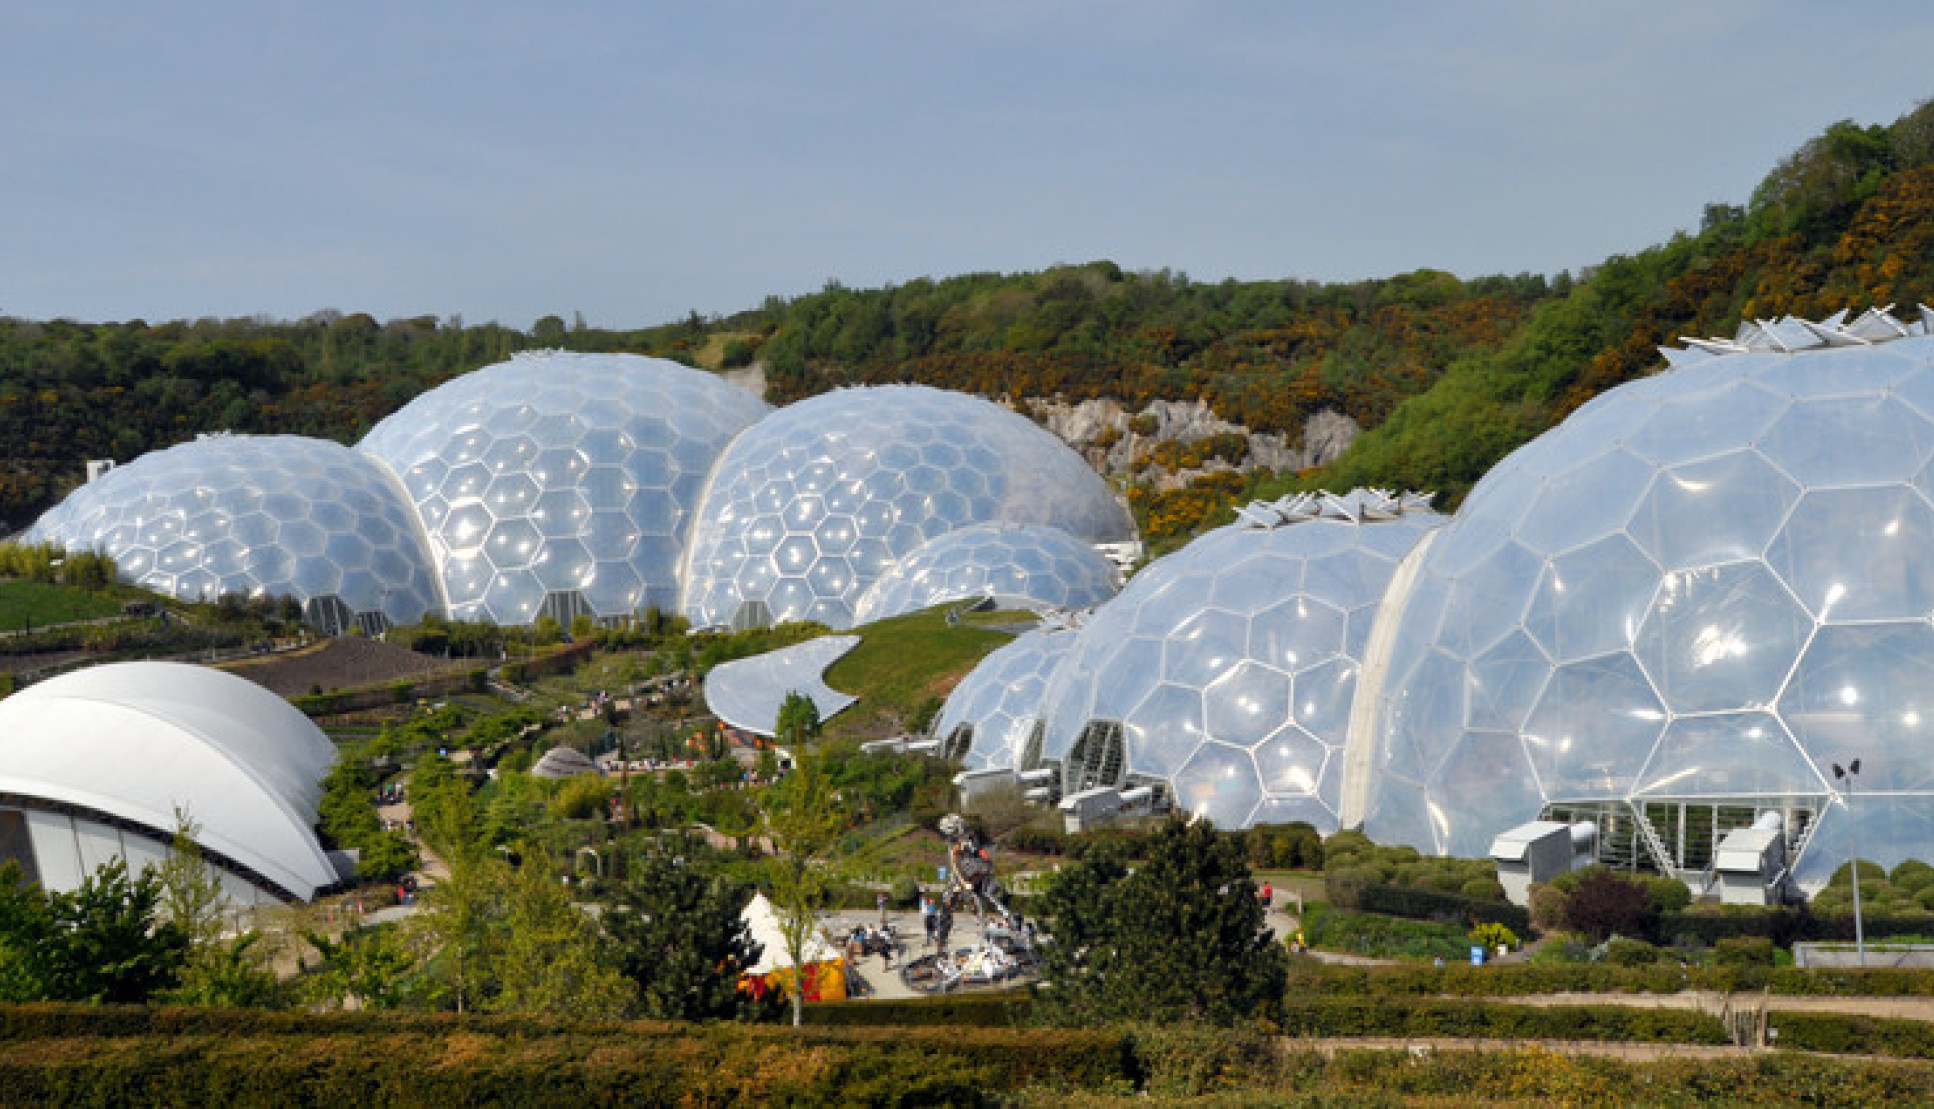 Photo of the domes of the Eden Project